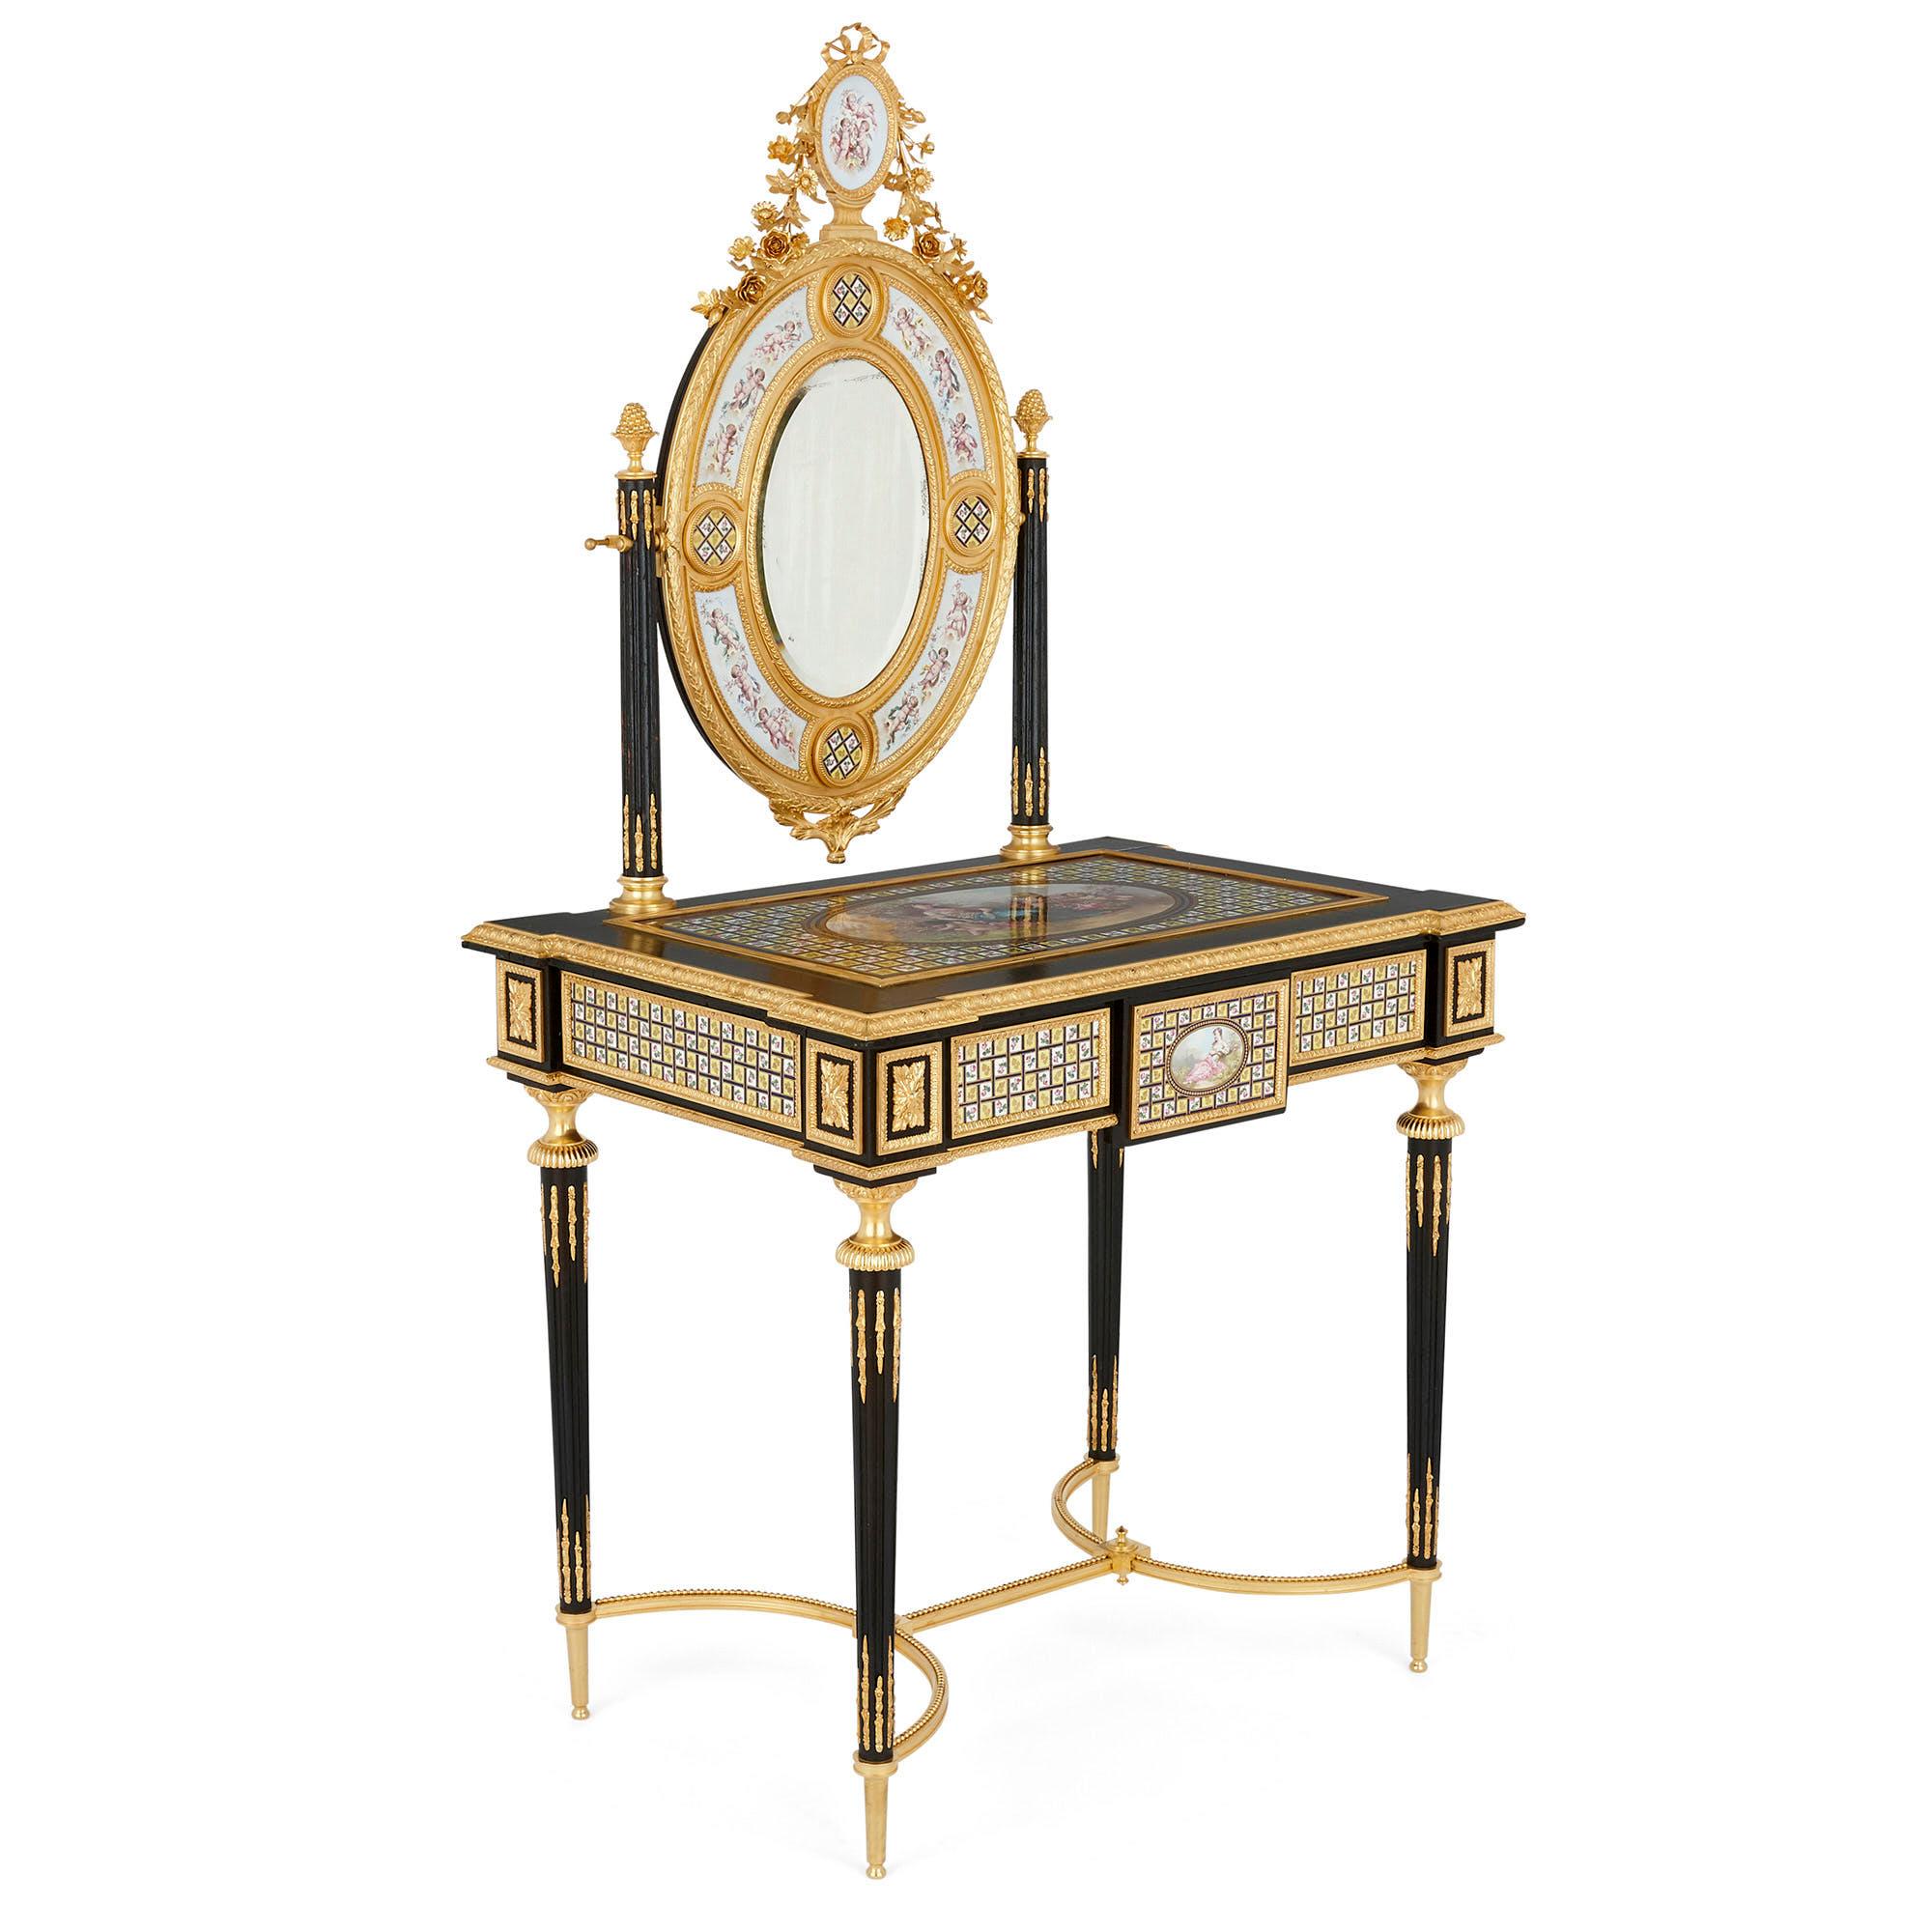 Crafted from sumptuous materials, this porcelain, gilt bronze, and ebonised wood dressing table is an exceptional piece of 19th century French design.

The table features an ebonised wood top, mounted to the edge with gilt bronze, and inset with a